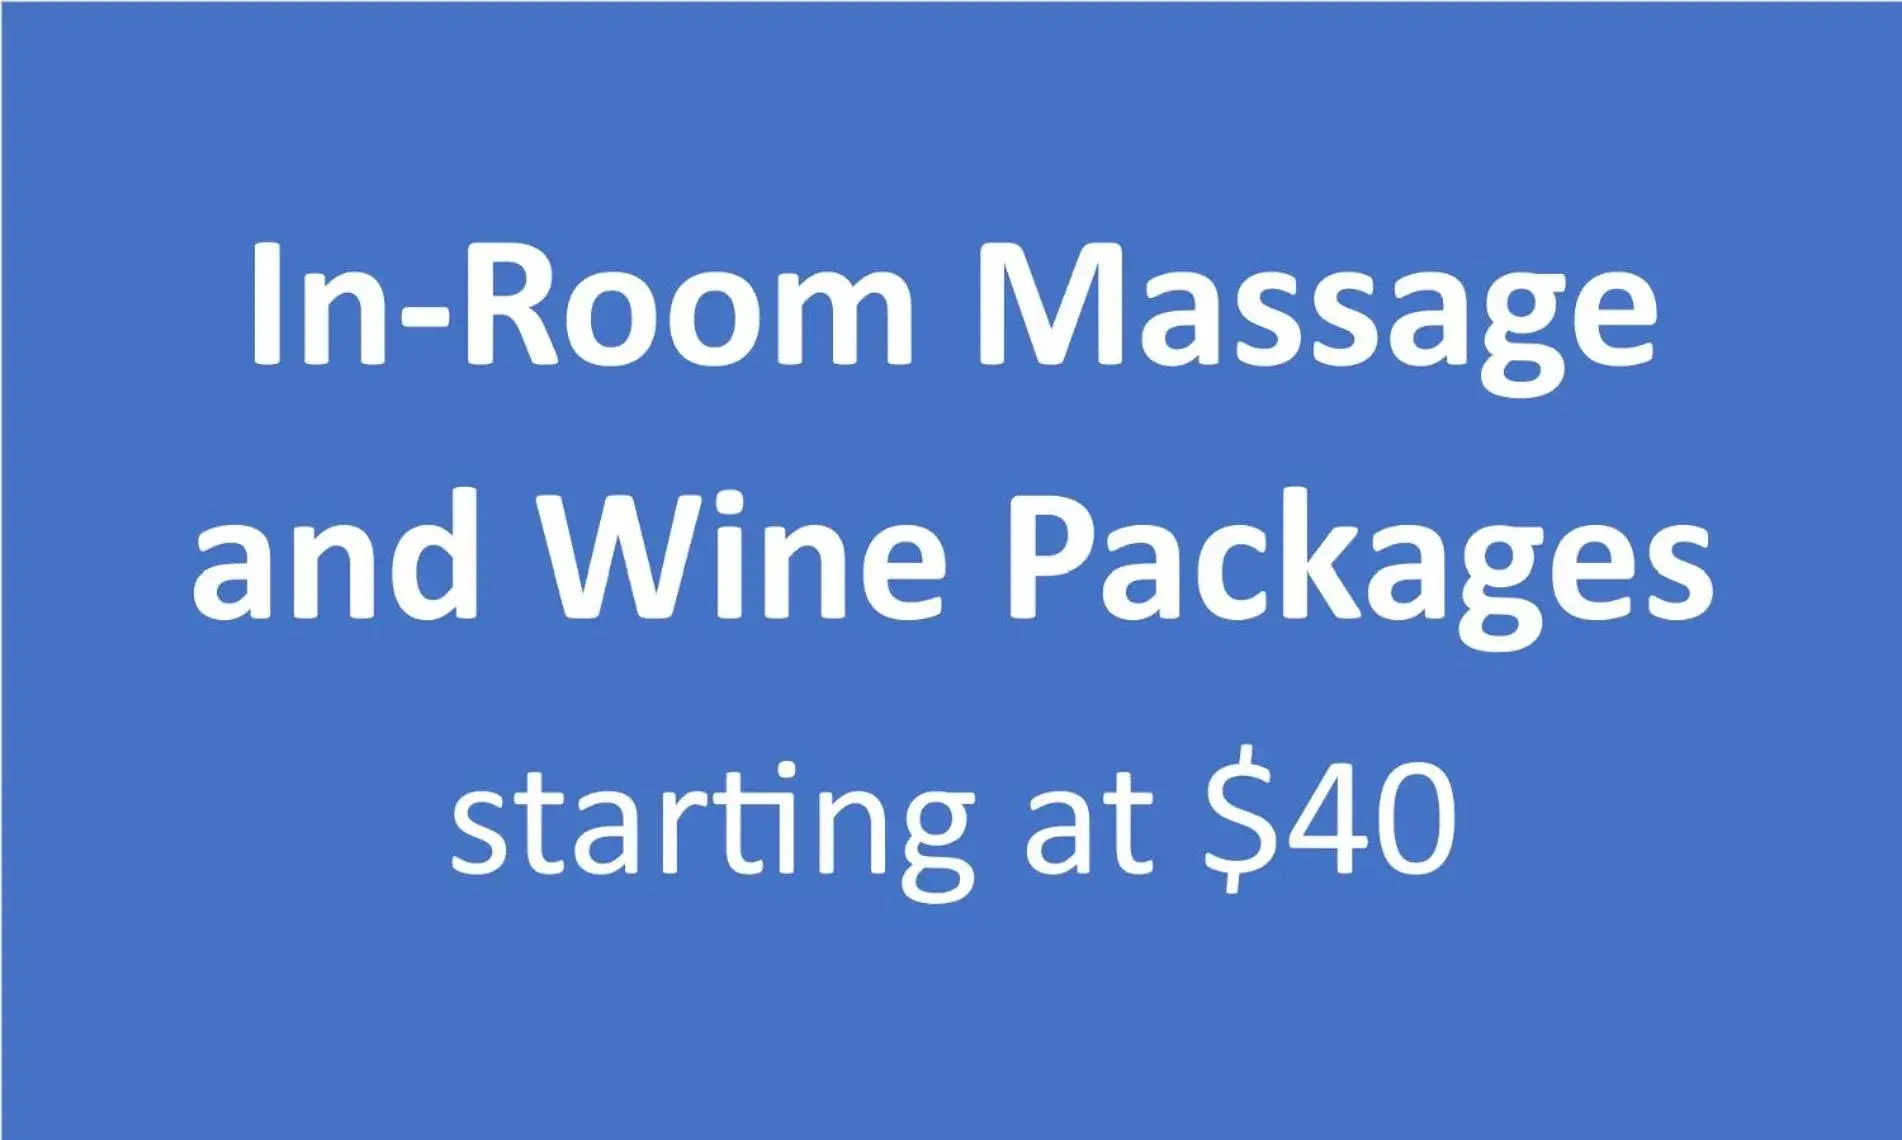 Alcoholic drinks in Escape to Myrtle Beach! Massage-Wine-Photoshoot Packages